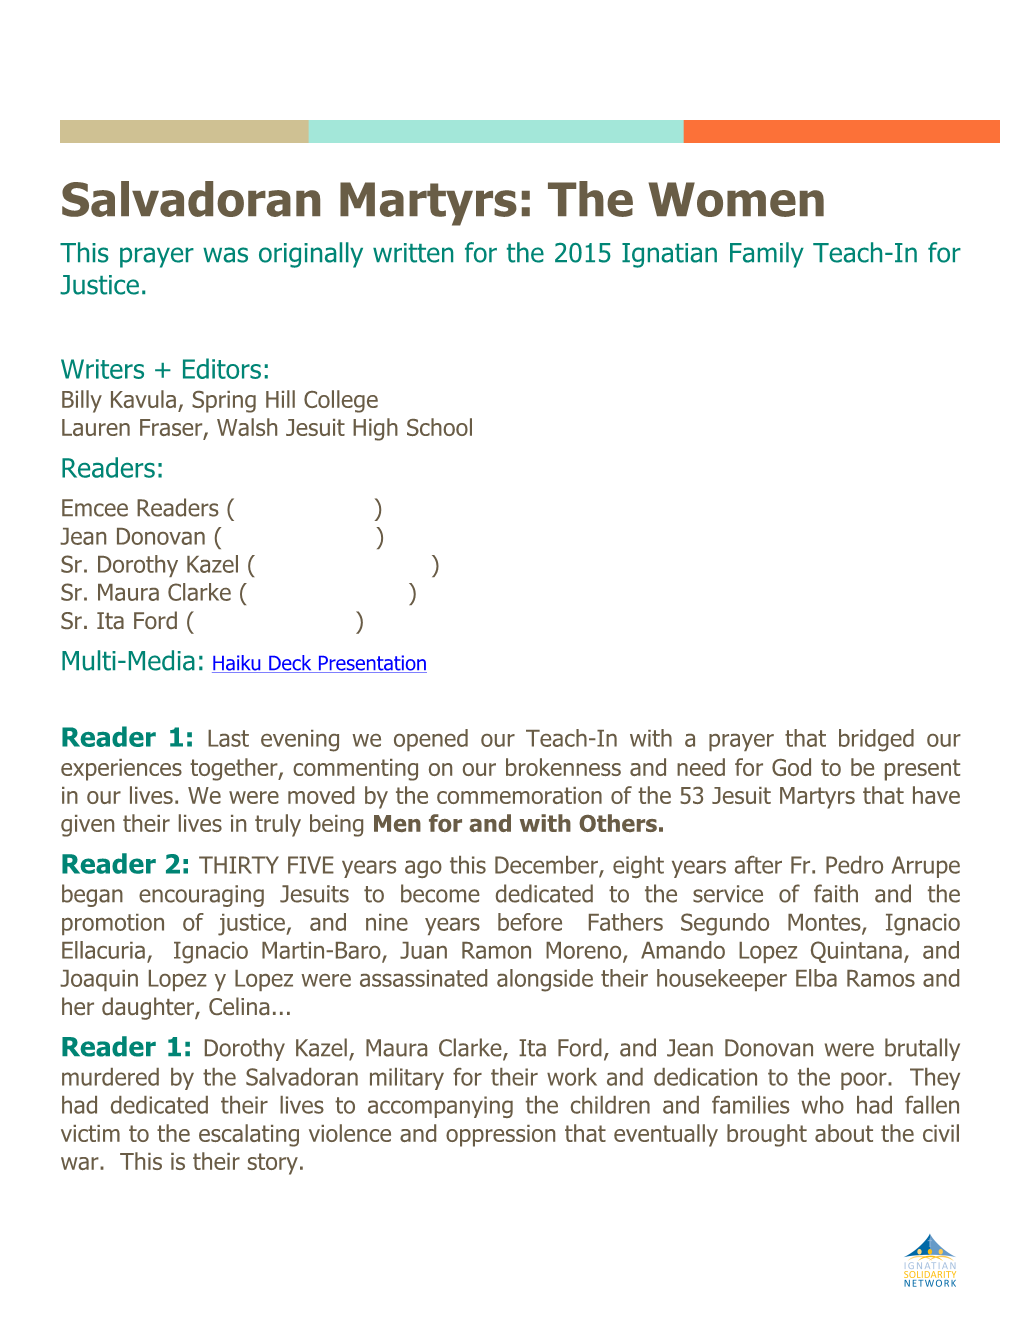 Salvadoran Martyrs: the Women This Prayer Was Originally Written for the 2015 Ignatian Family Teach-In for Justice